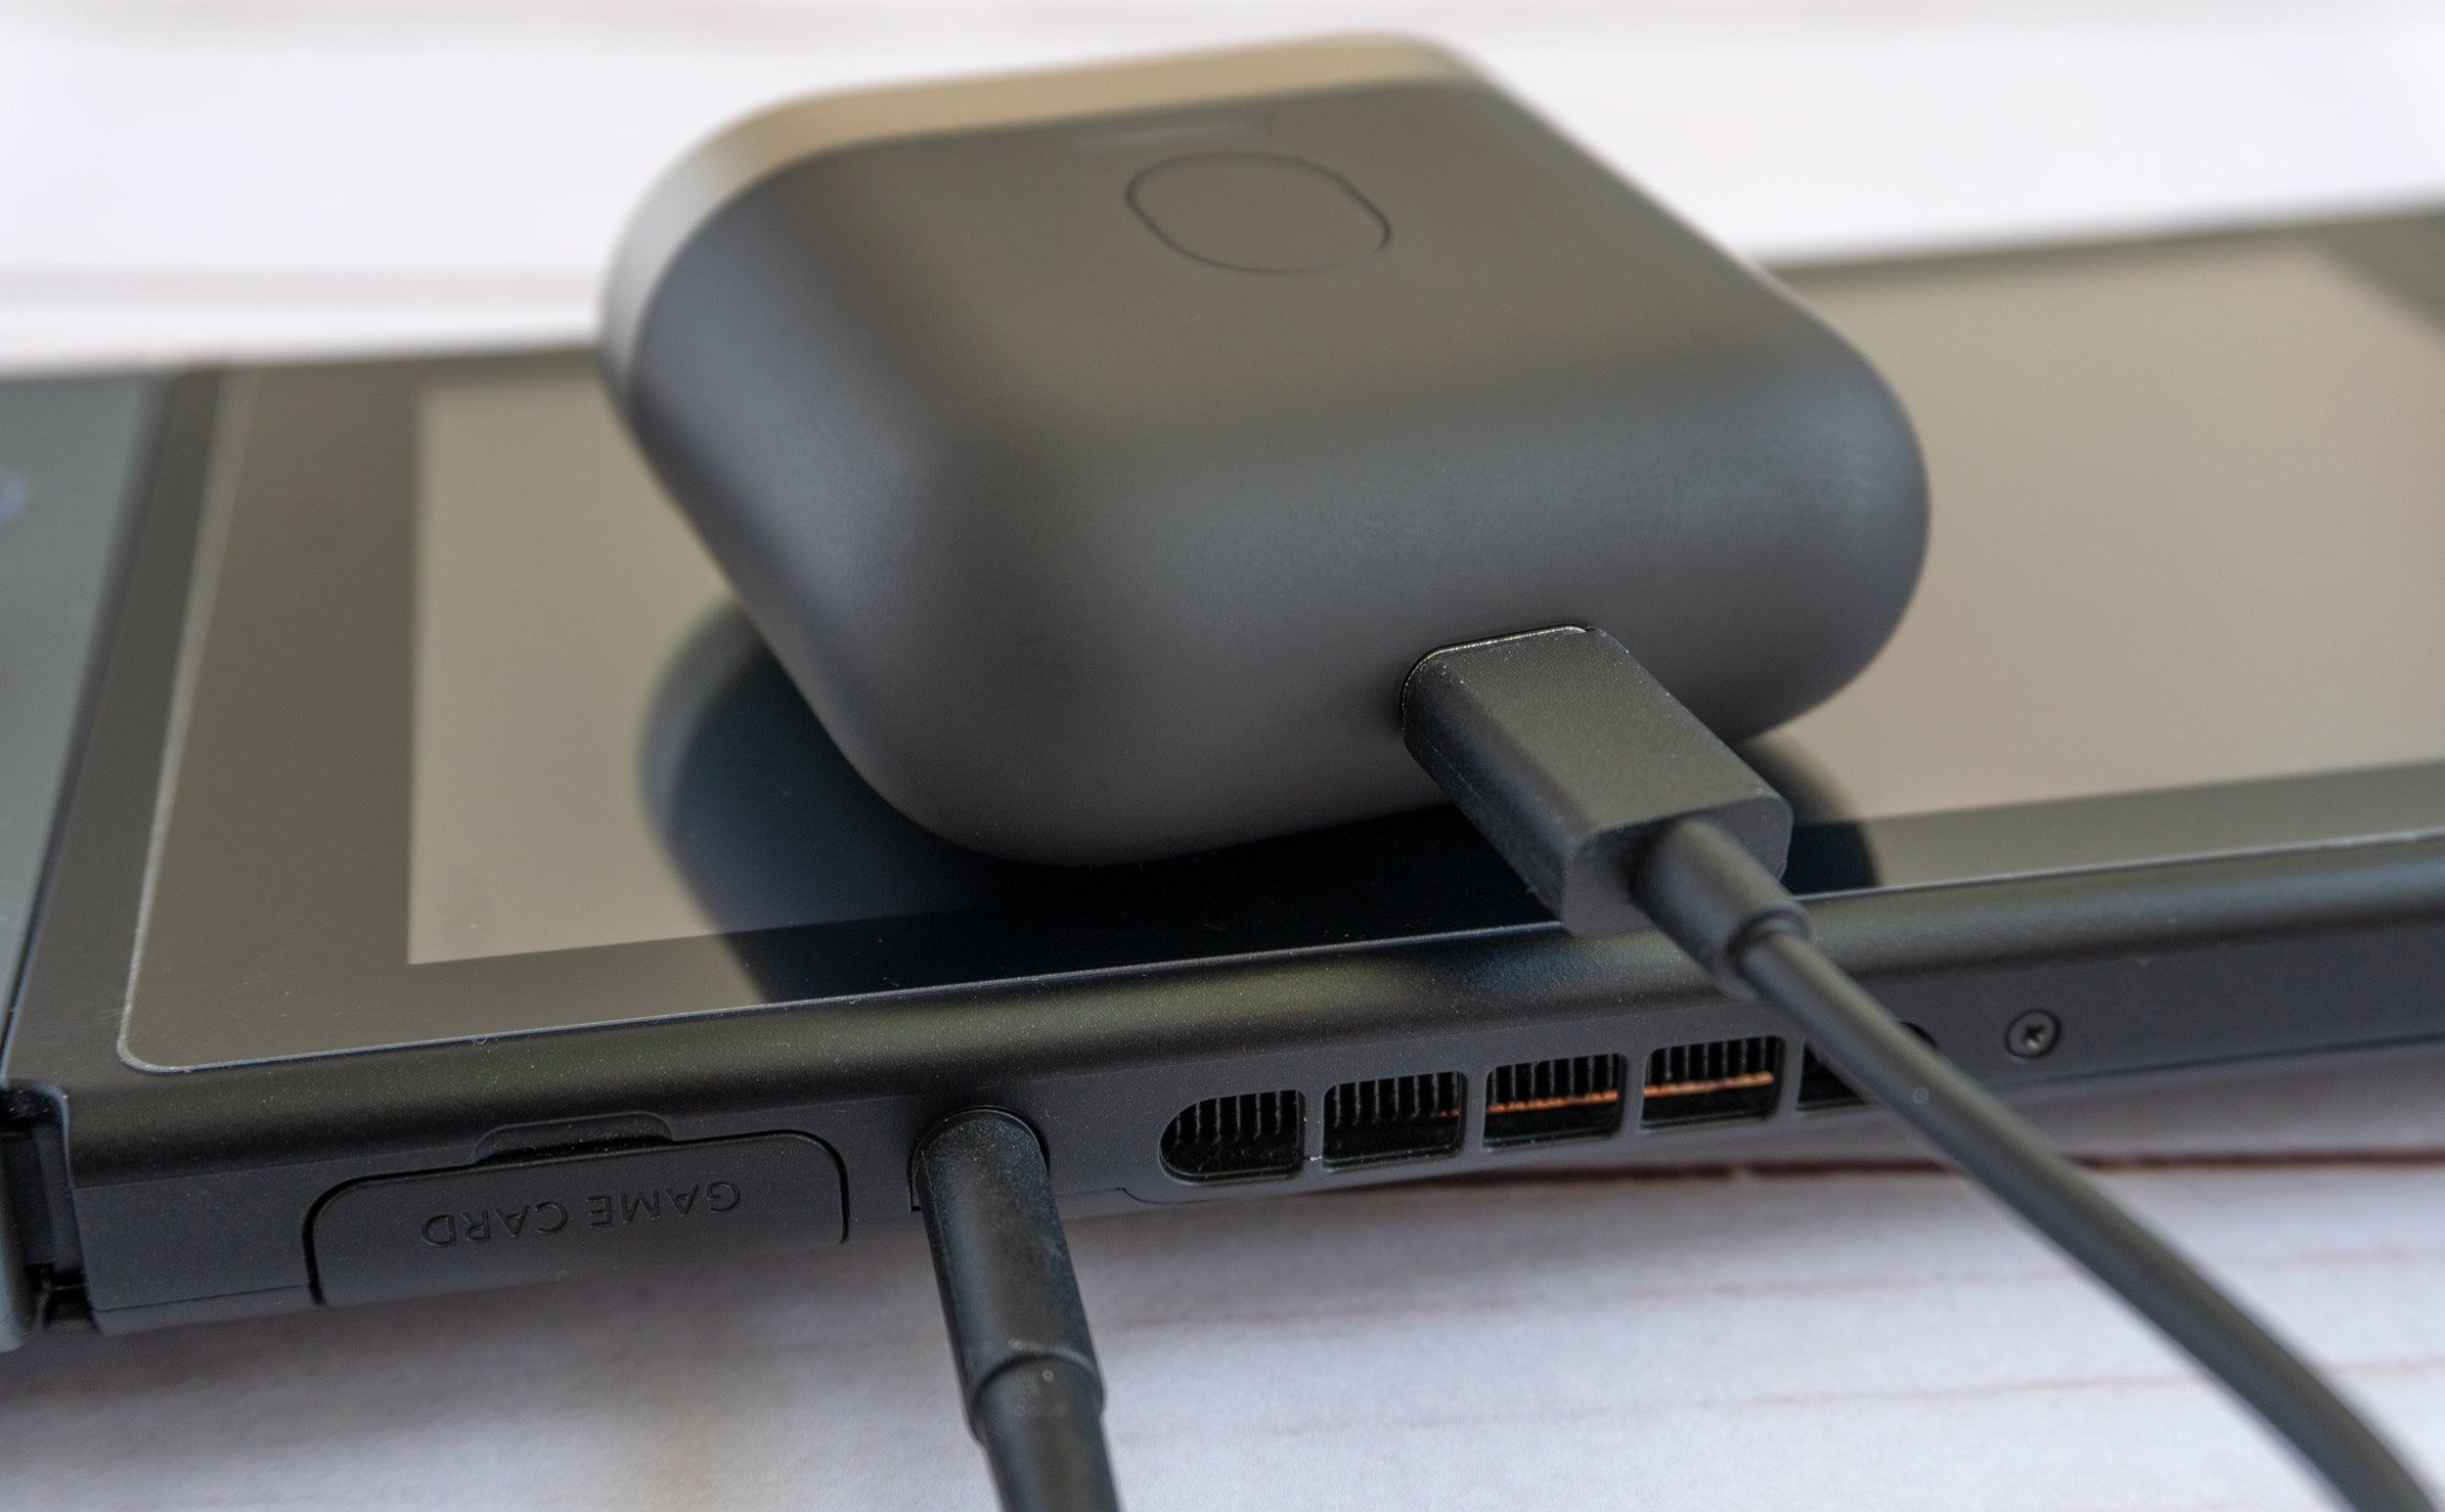 Being able to stream audio to the earbuds from any device through the charging case is a great feature, but it's dependent on a USB-C to 3.5-mm adaptor cable you'll need to remember to bring with you. (Photo: Andrew Liszewski/Gizmodo)